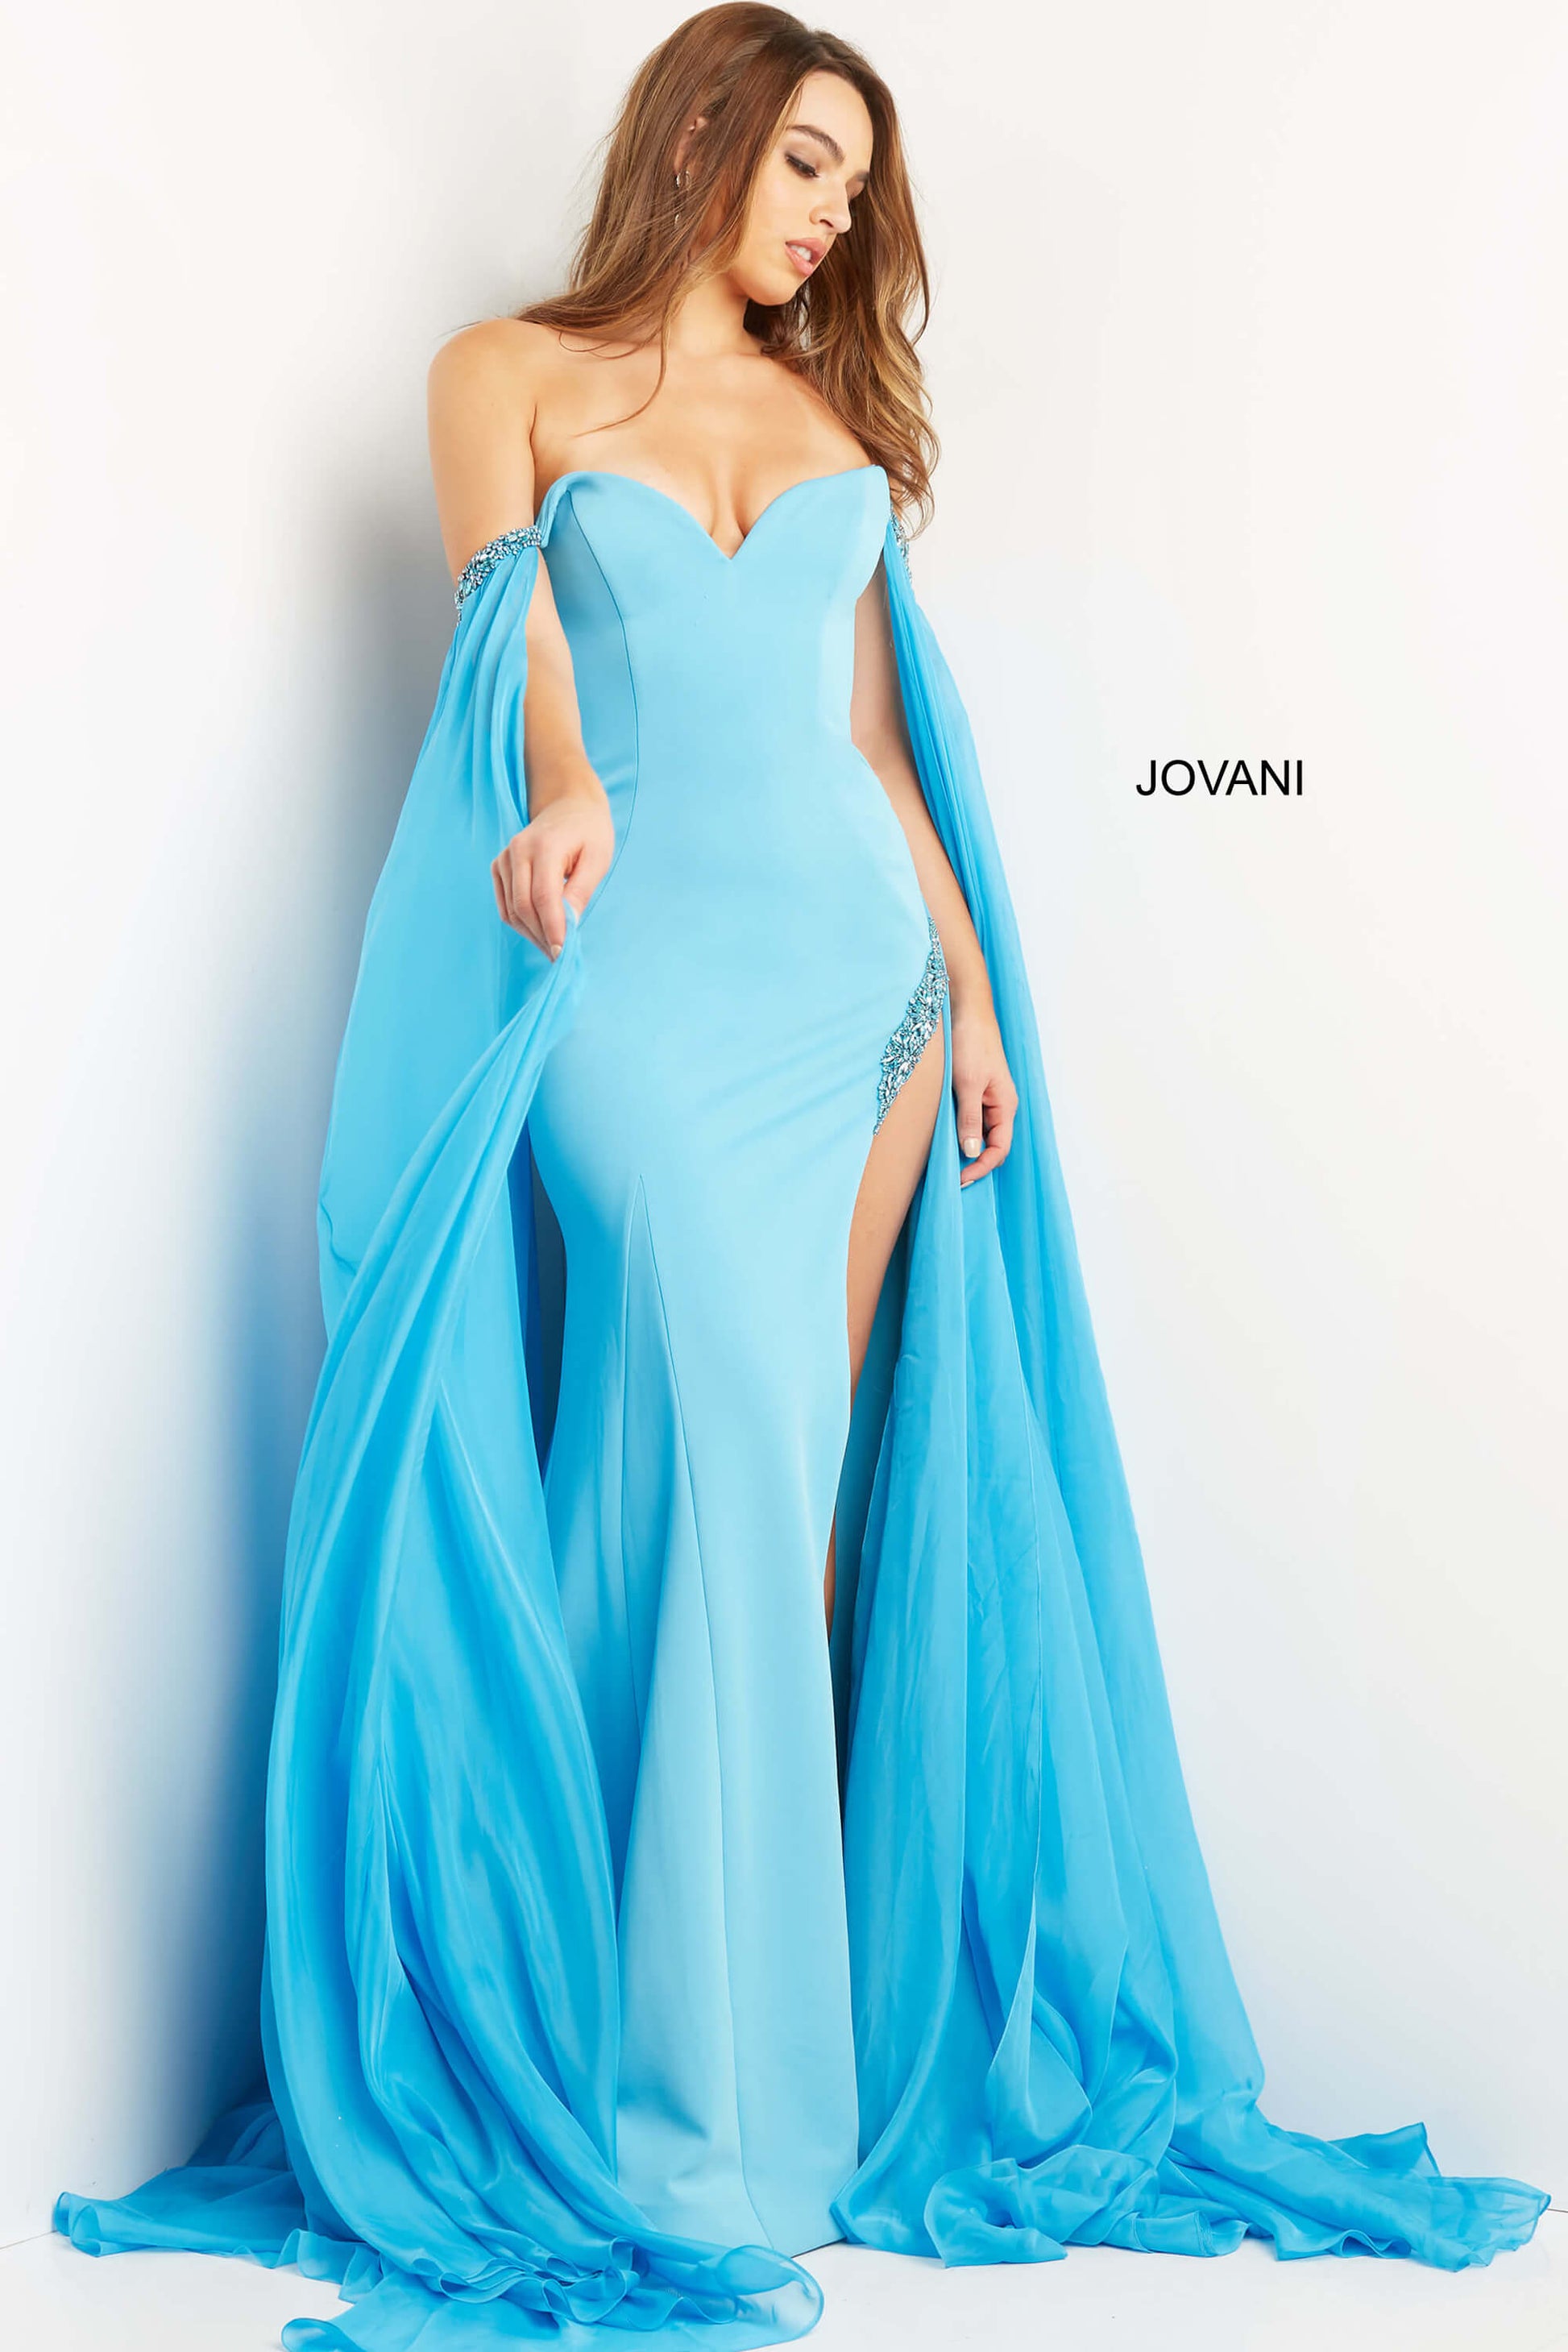 Jovani-07652-turquoise-blue-prom-dress-off-the-shoulder-strapless-flowy-cape-sleeves-fitted-side-slit